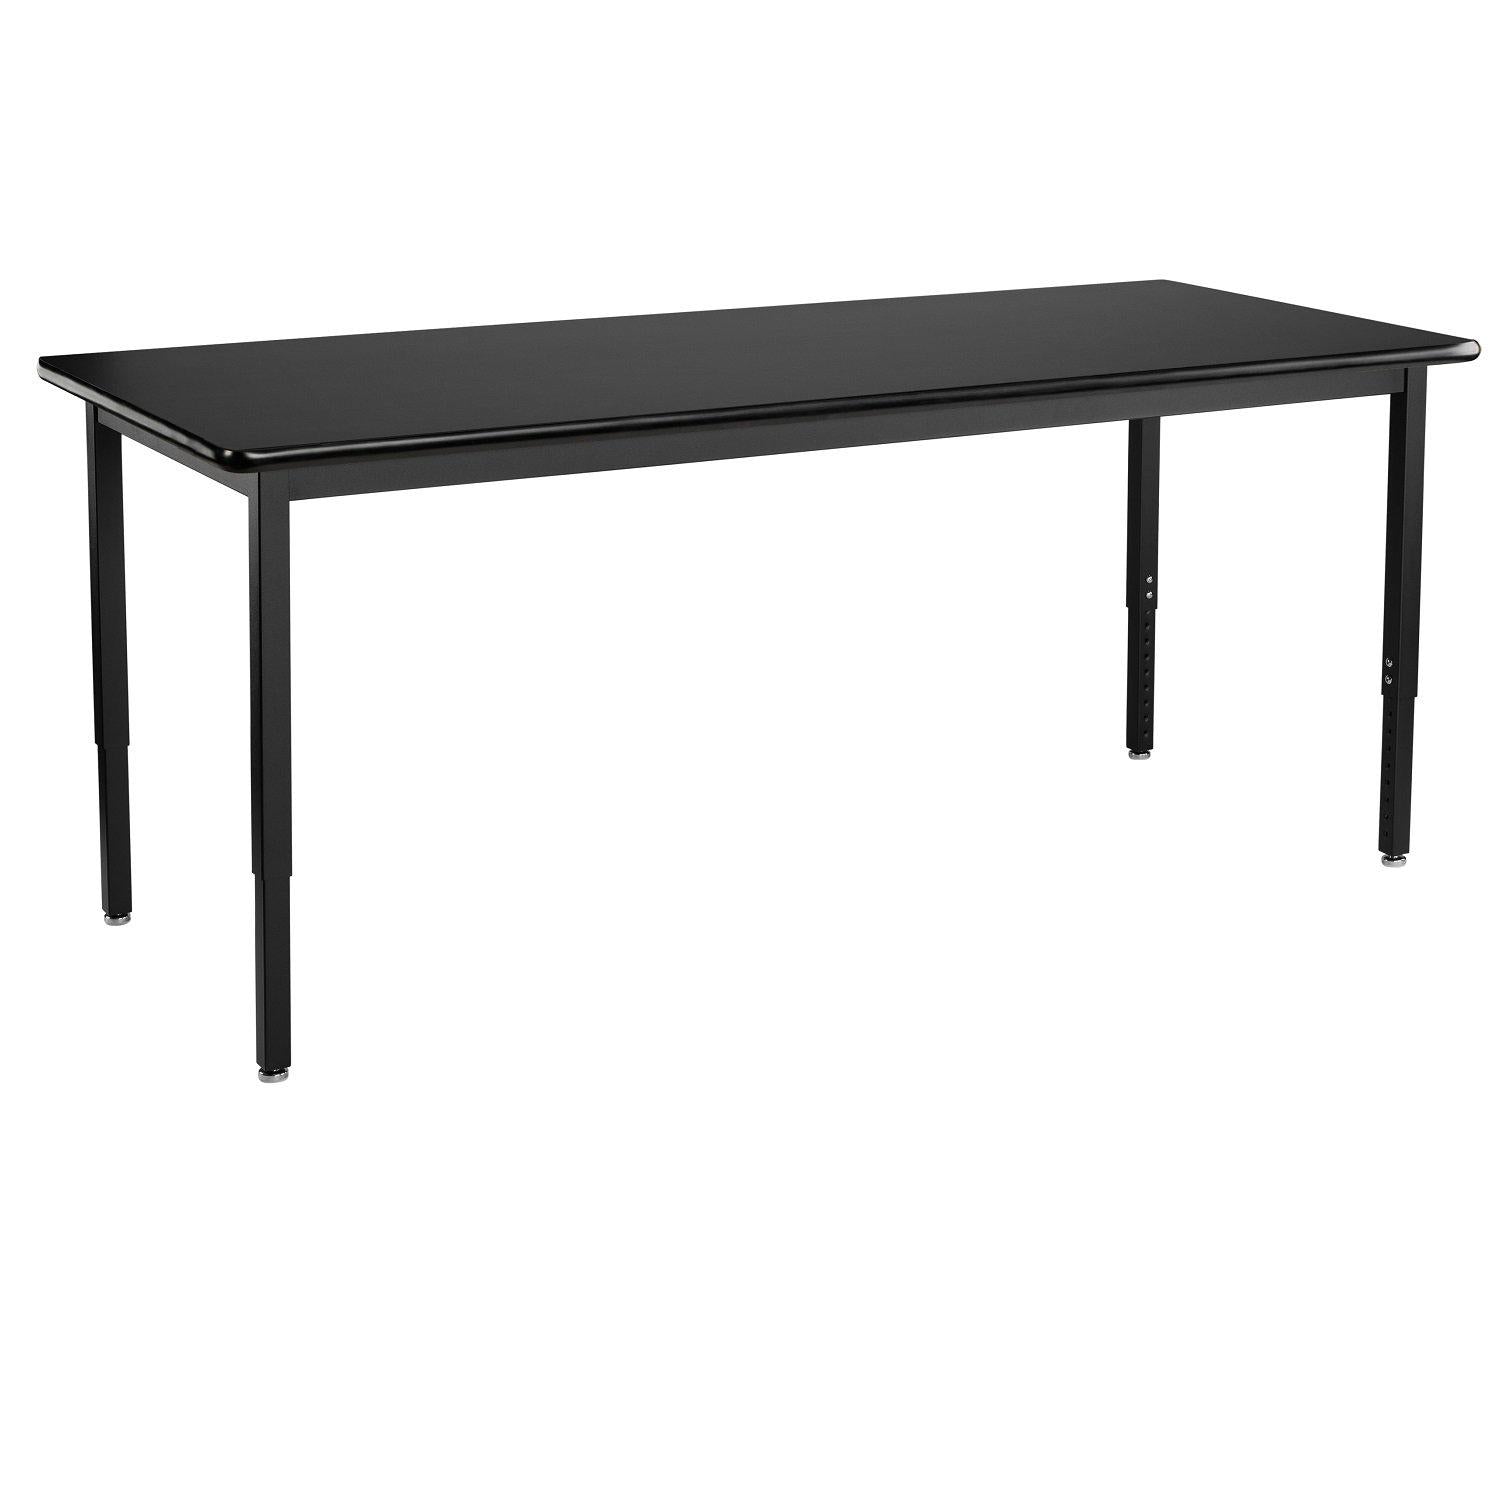 Heavy-Duty Height-Adjustable Utility Table, Black Frame, 24" x 84", High-Pressure Laminate Top with T-Mold Edge